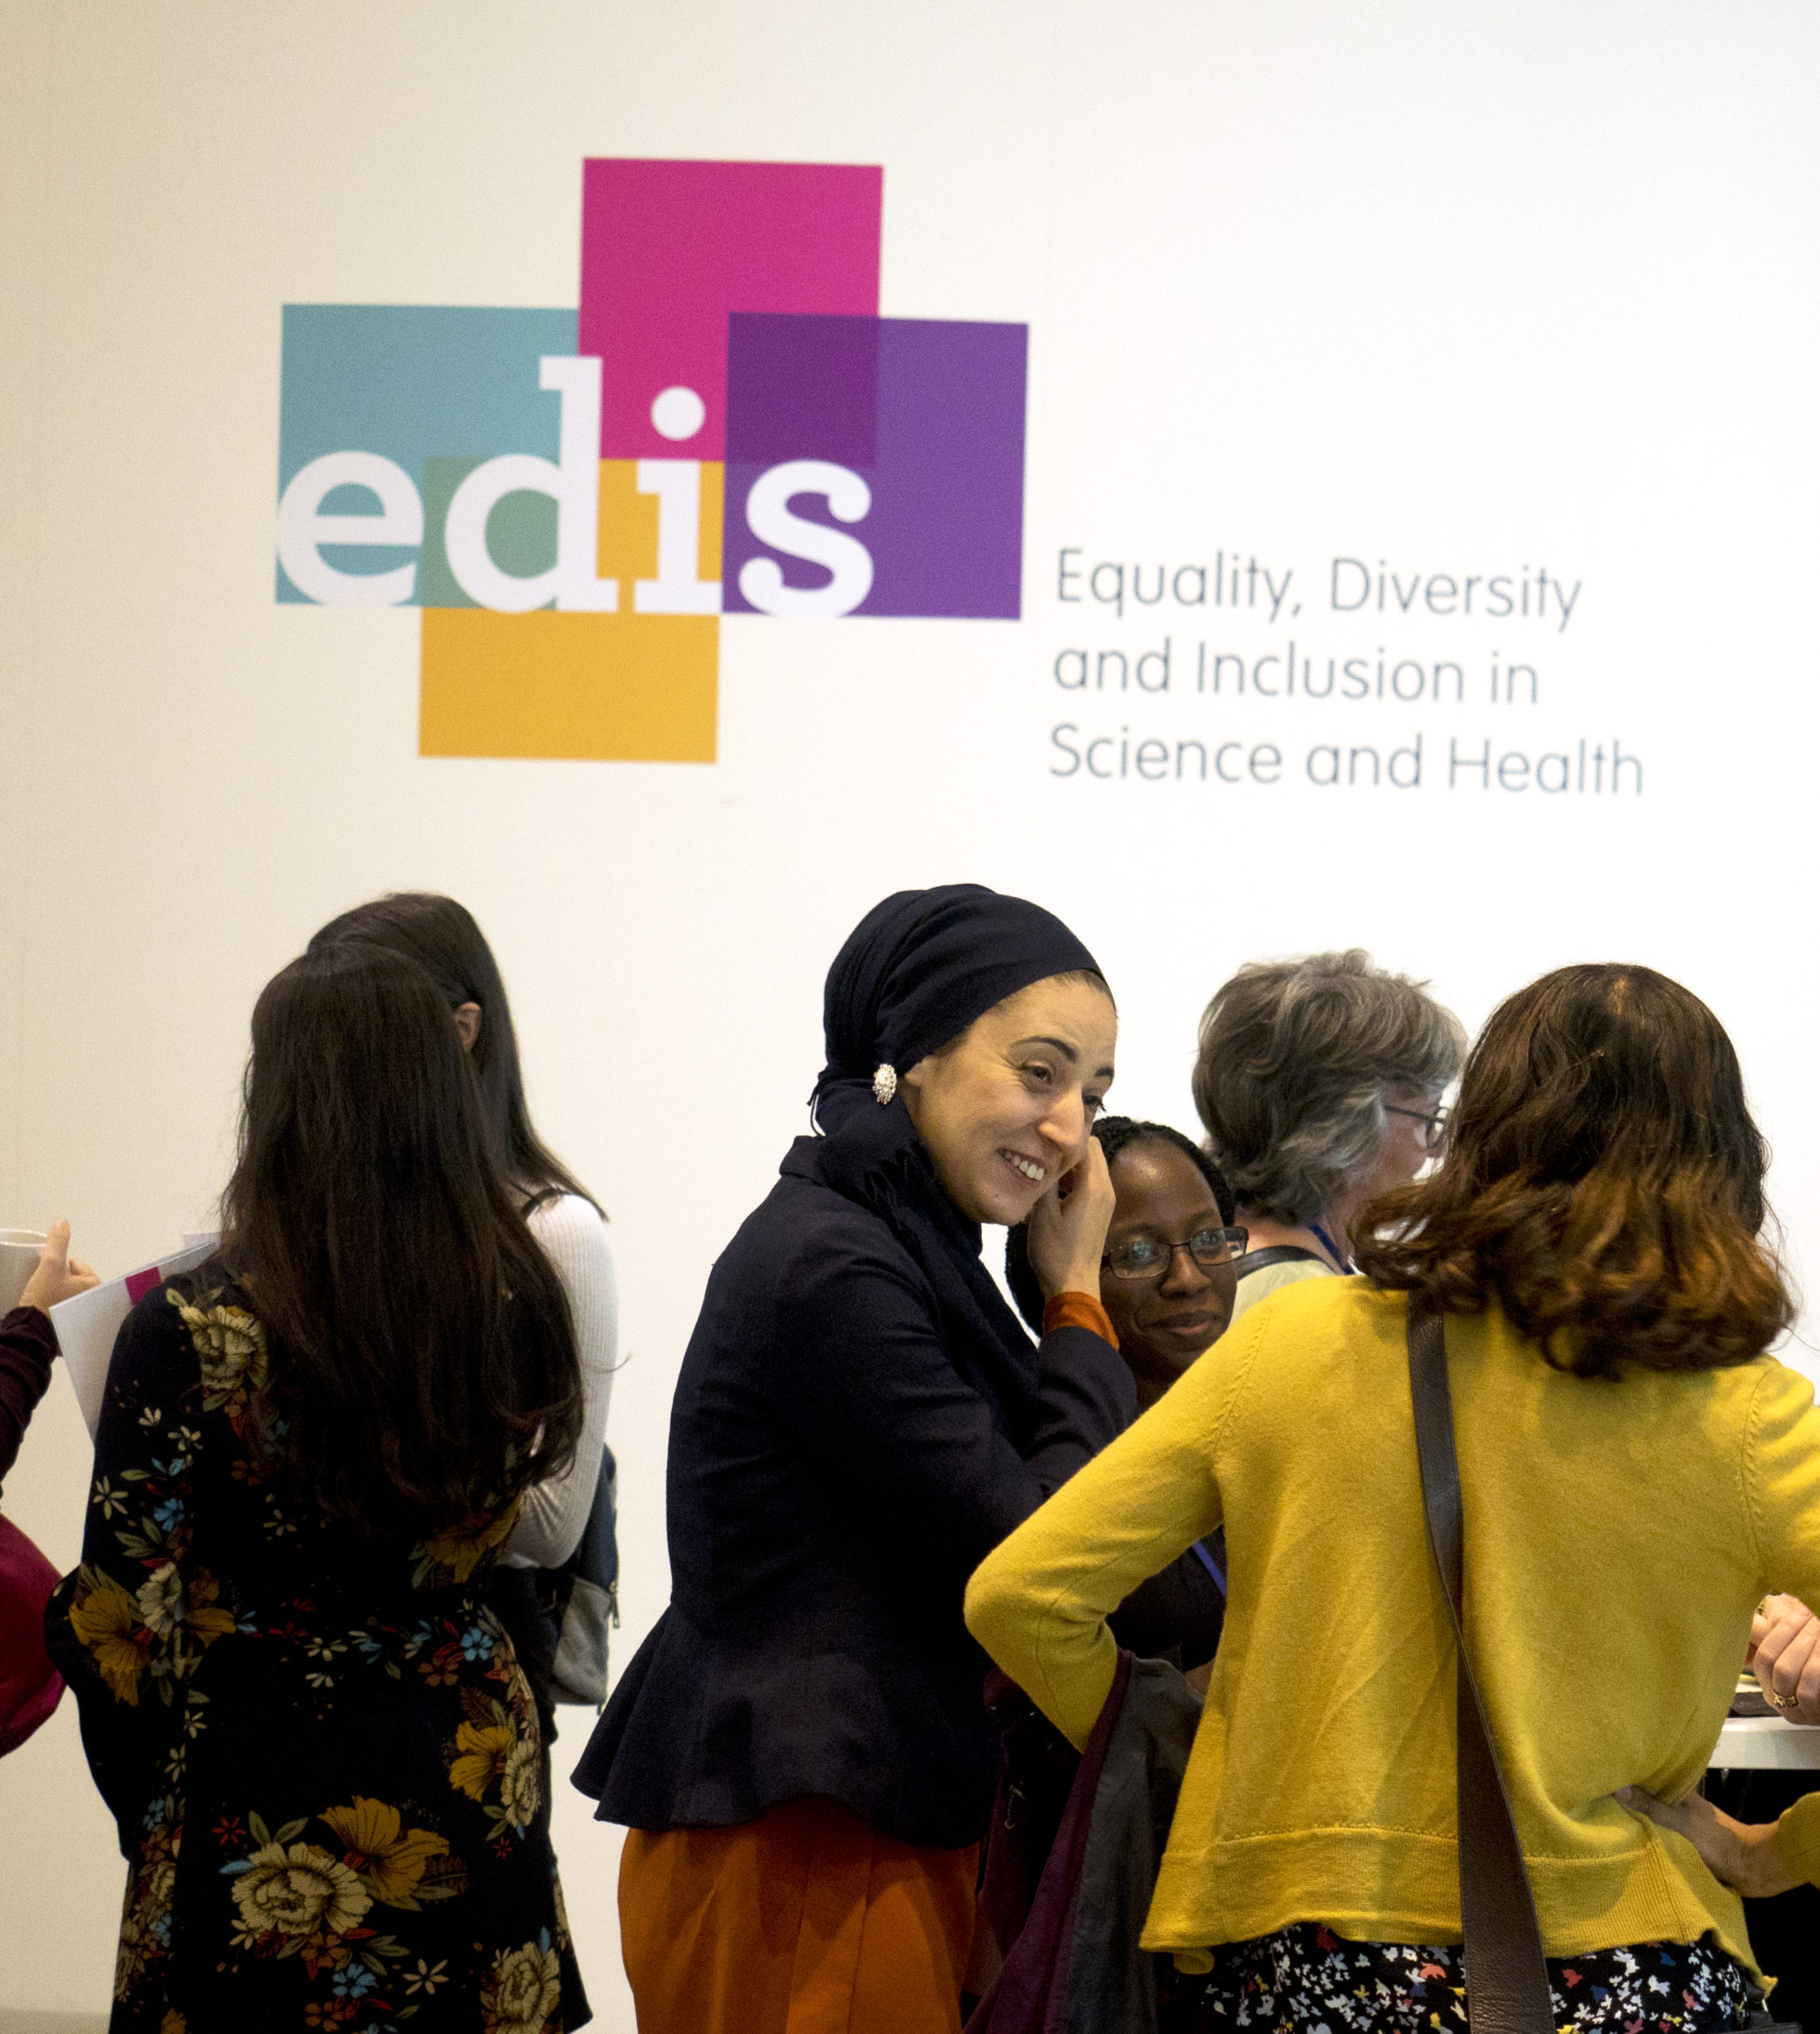 Photo of people talking and smiling underneath an EDIS wall logo